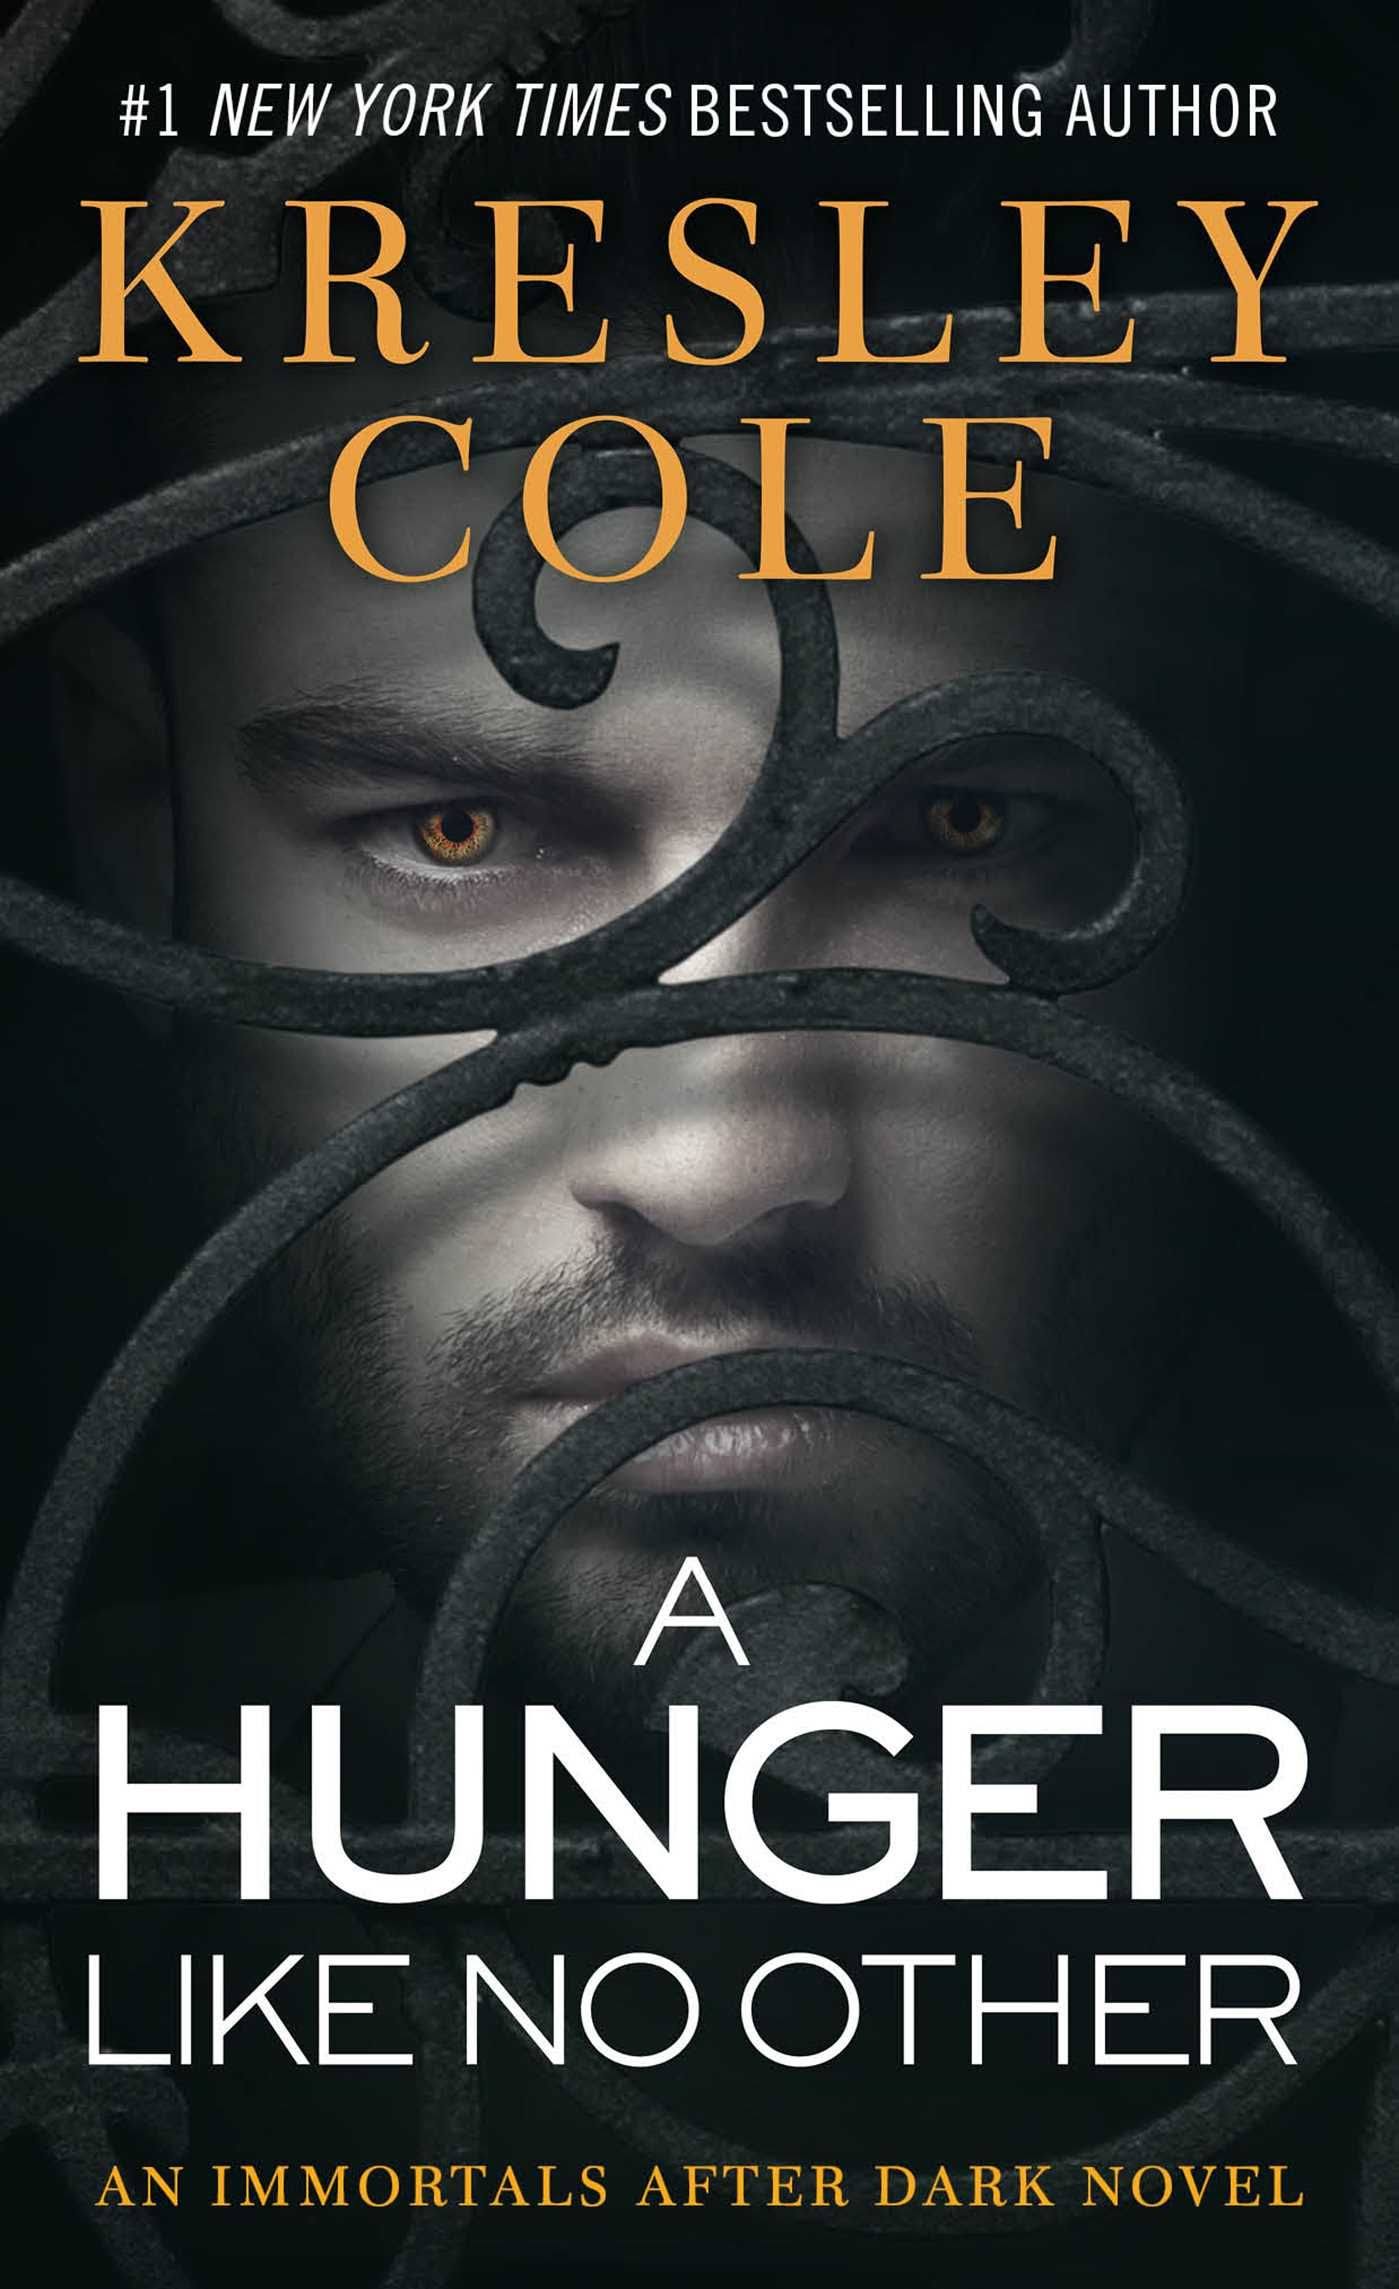 Immortals After Dark #1: A Hunger Like No Other by Kresley Cole